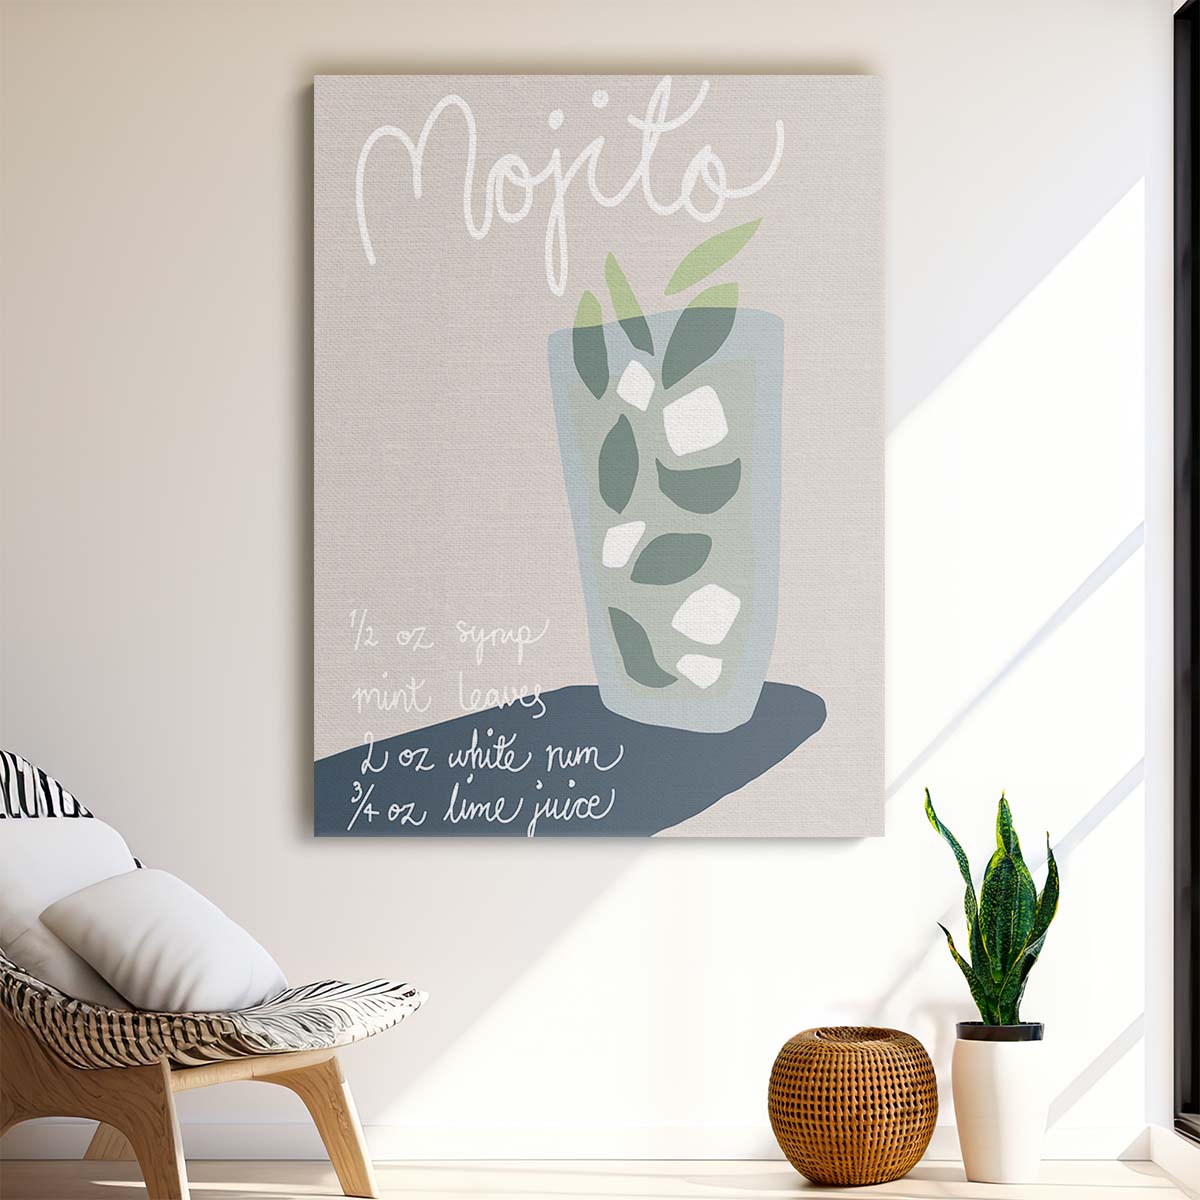 Creative Mojito Cocktail Recipe Kitchen Bar Illustration Wall Art by Luxuriance Designs, made in USA